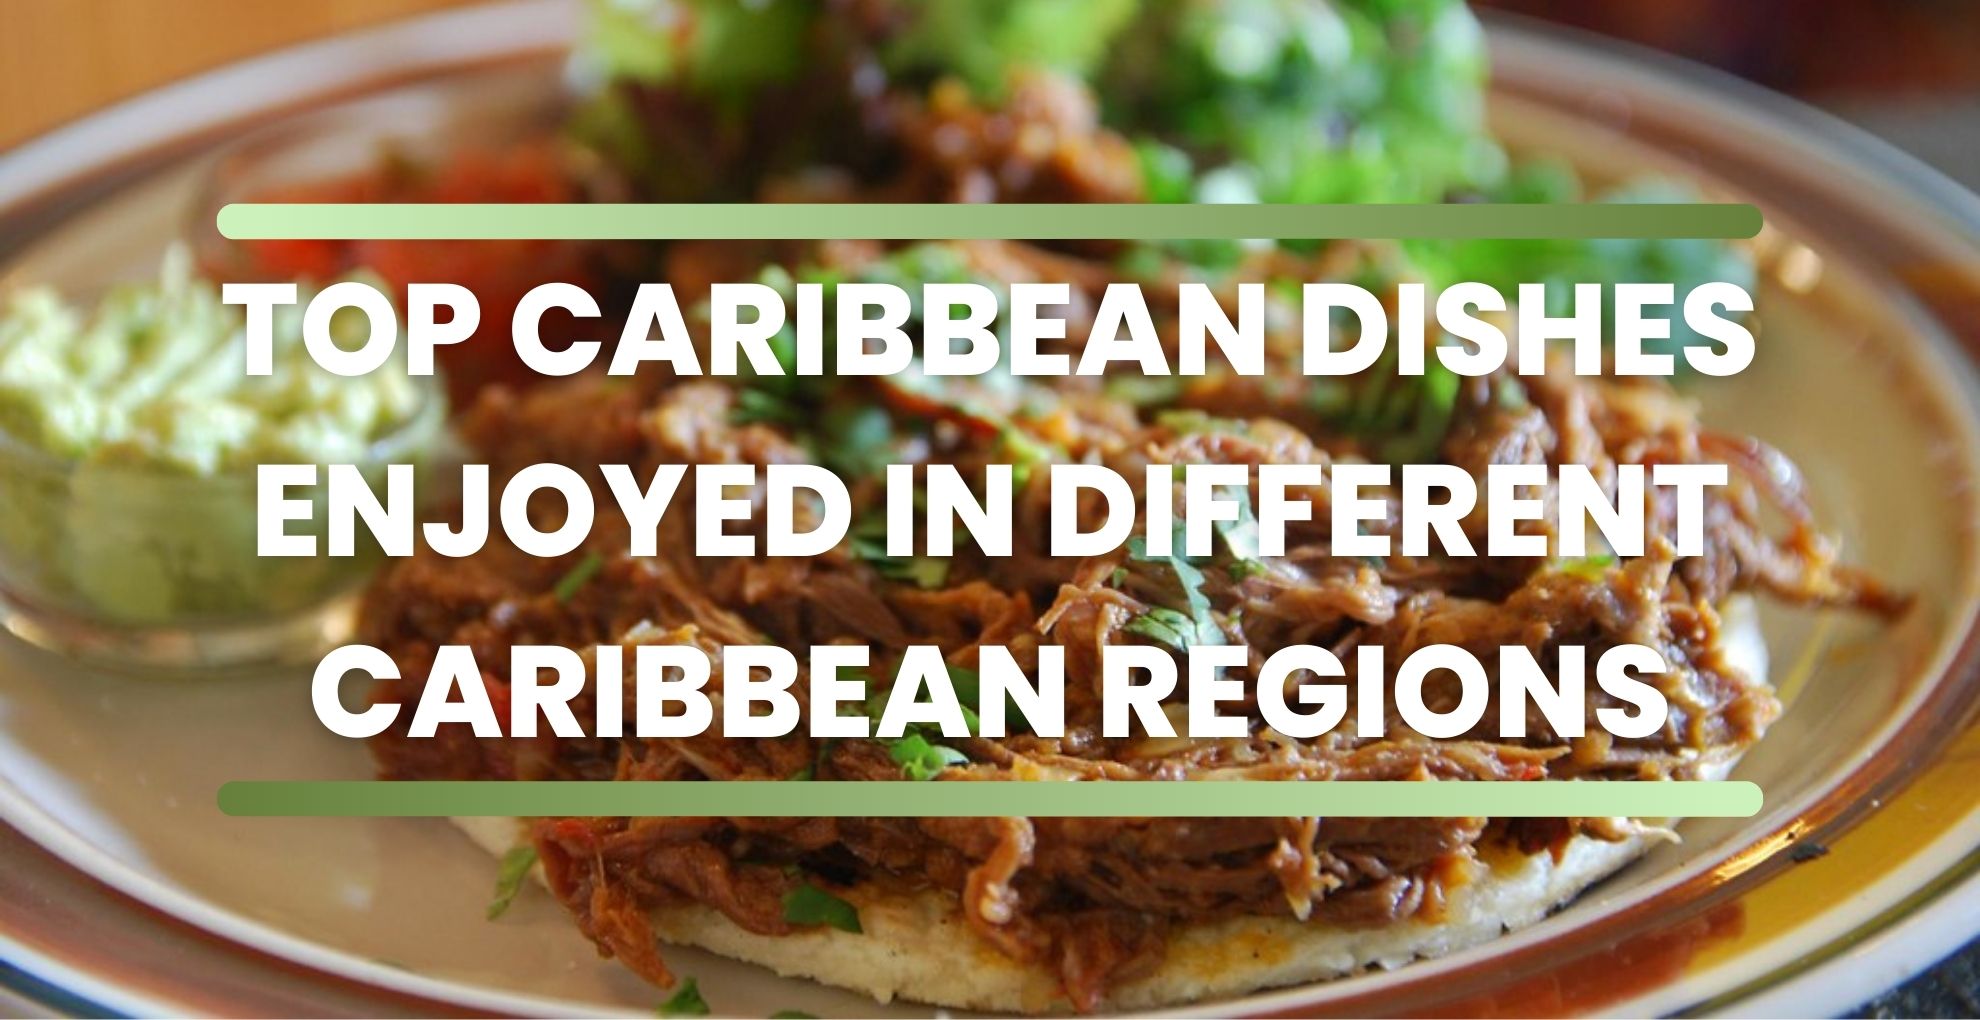 Top Caribbean Dishes Enjoyed In Different Caribbean Regions